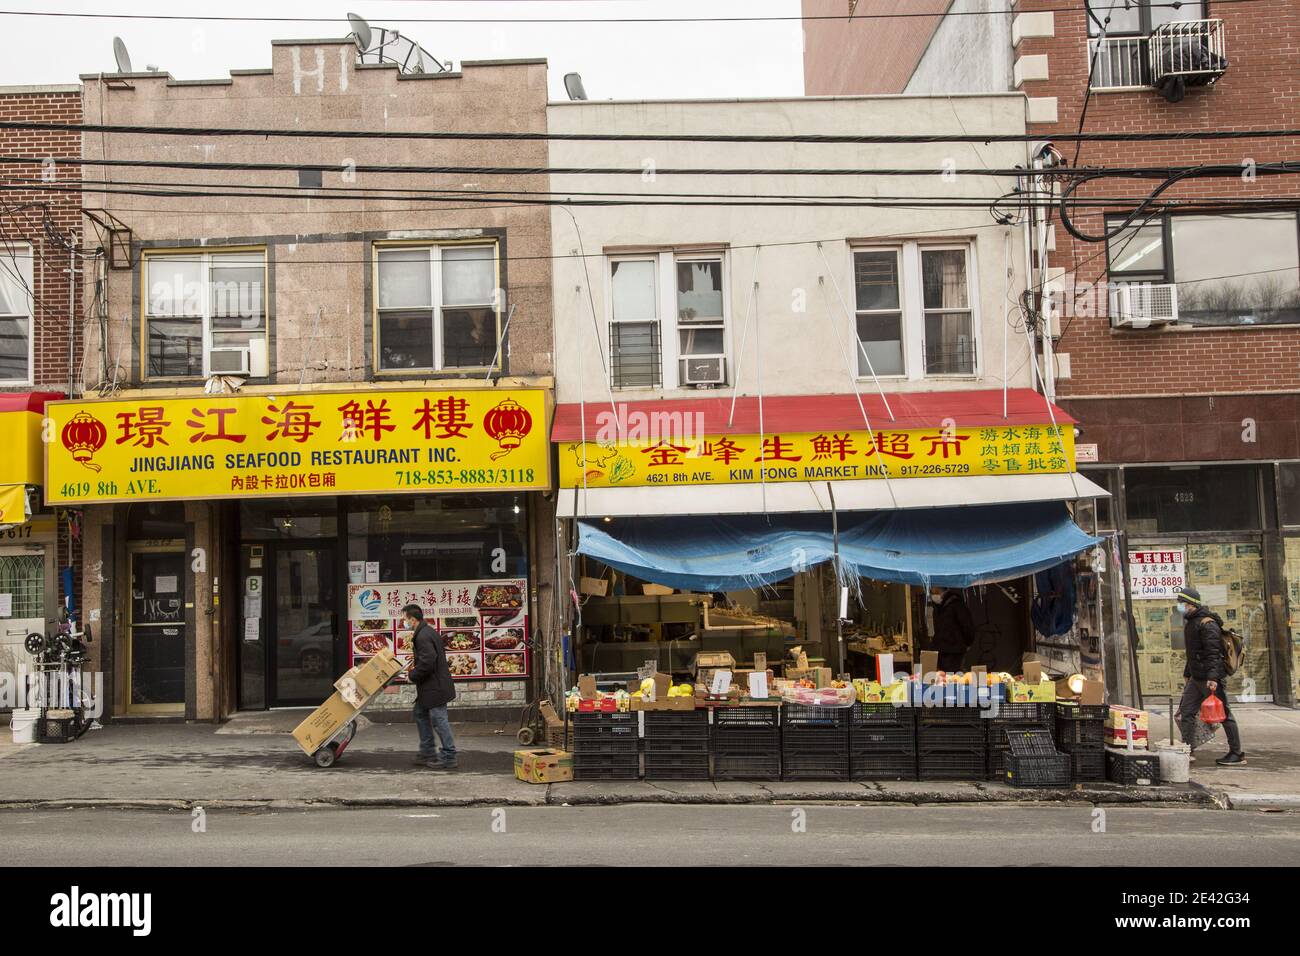 Seafood restaurant next to a produce market along 8th Avenue in the Chinatown section of Sunset Park in Brooklyn, New York. Stock Photo